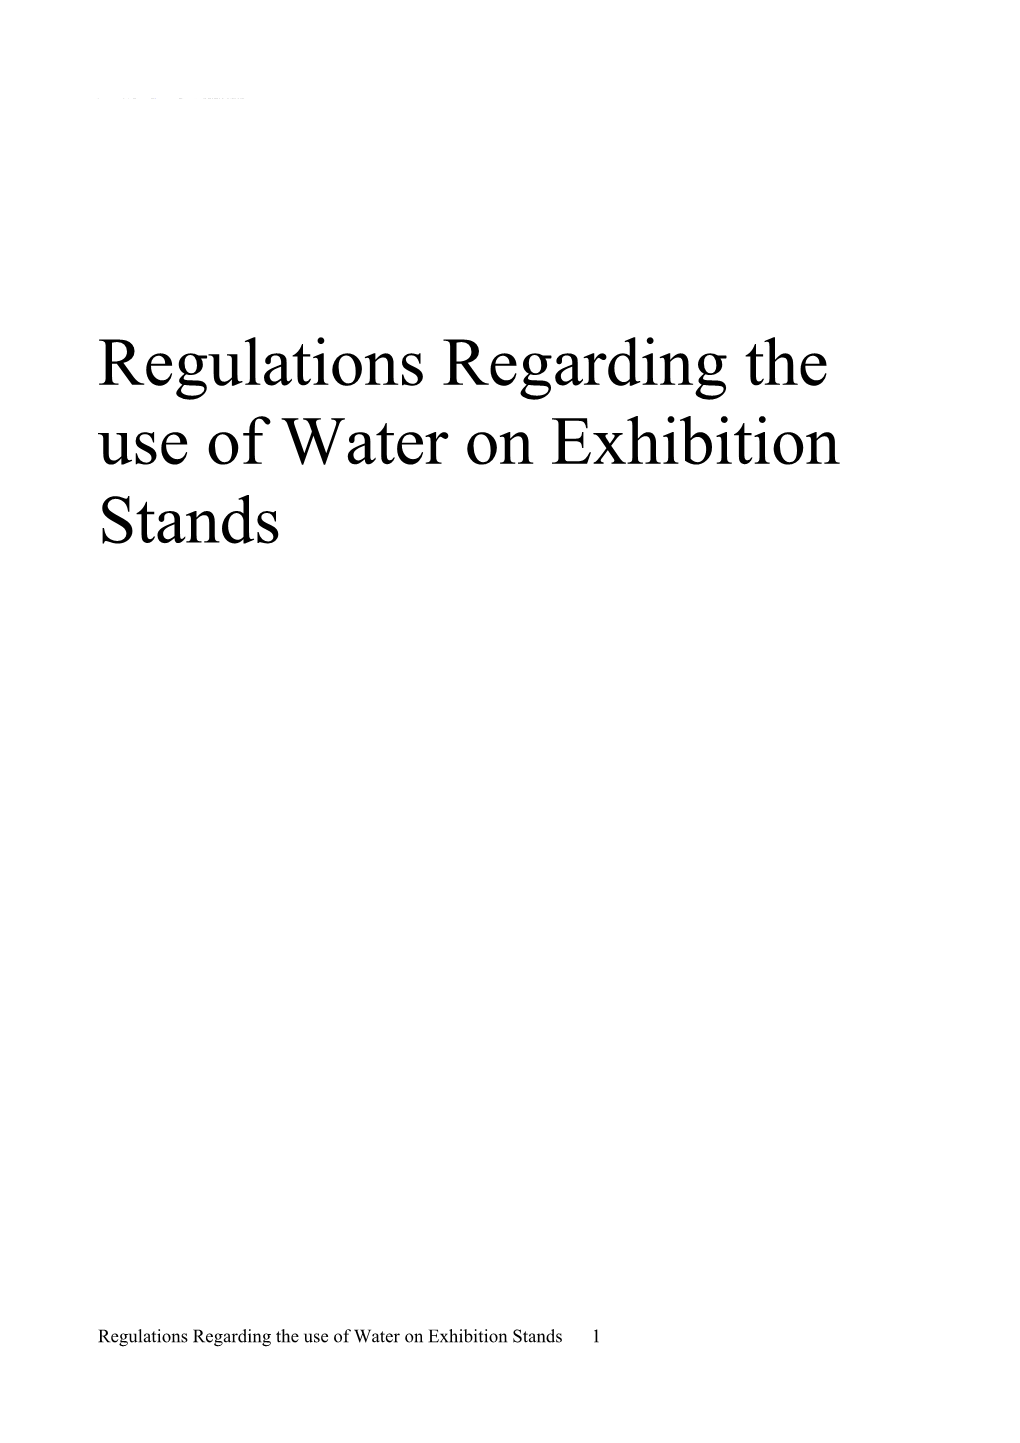 Regulations Regarding the Use of Water on Exhibition Stands